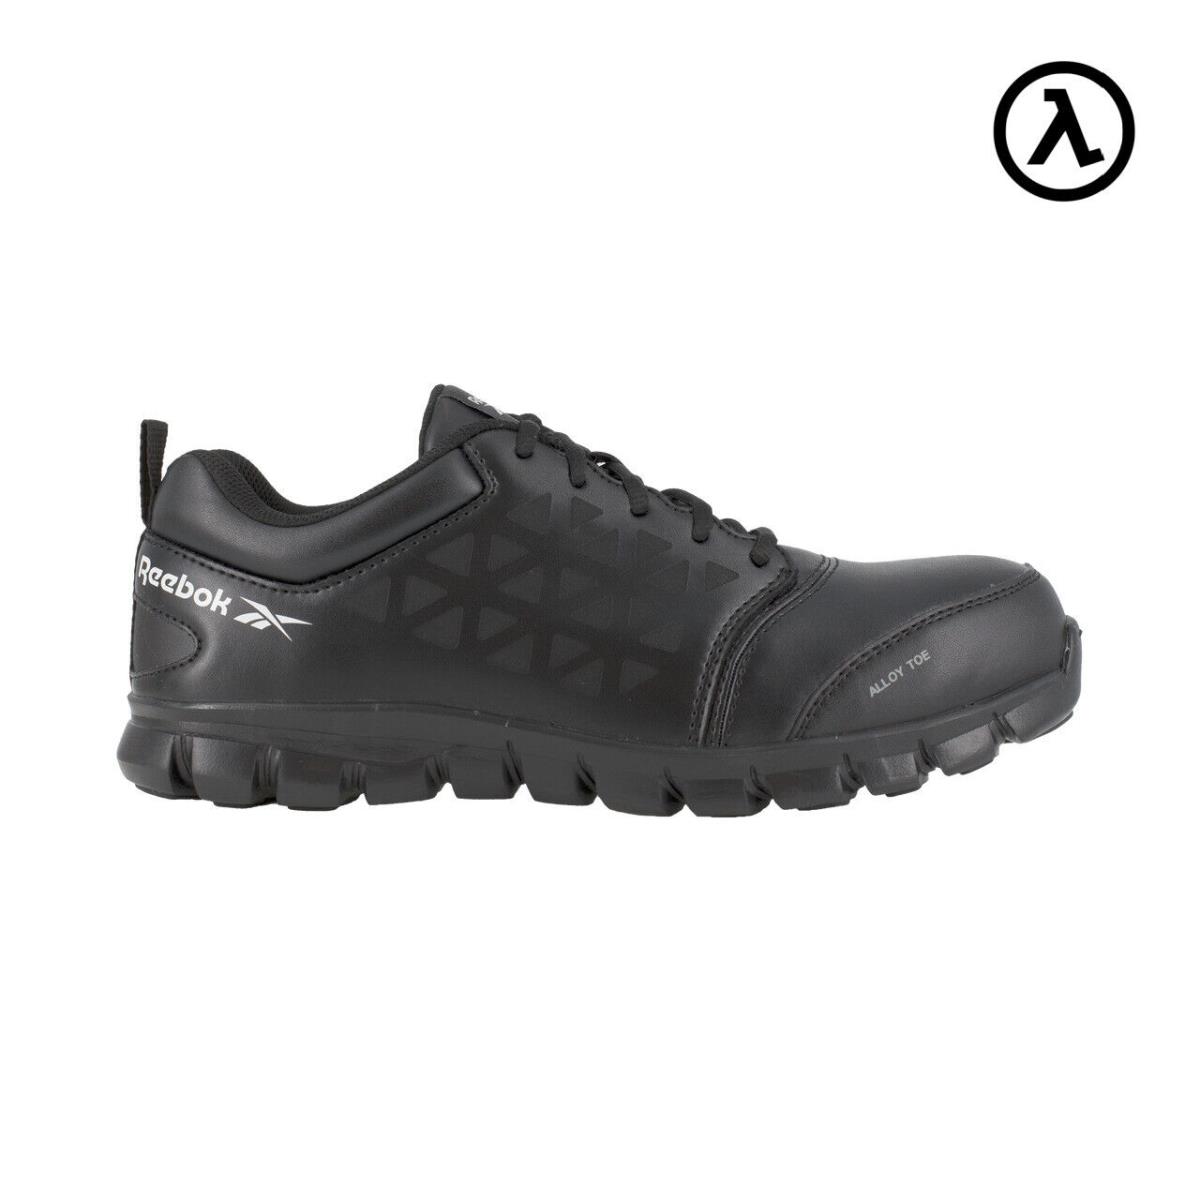 Reebok Sublite Cushion Women`s Athletic Work Shoe Black Boots RB047 - All Sizes